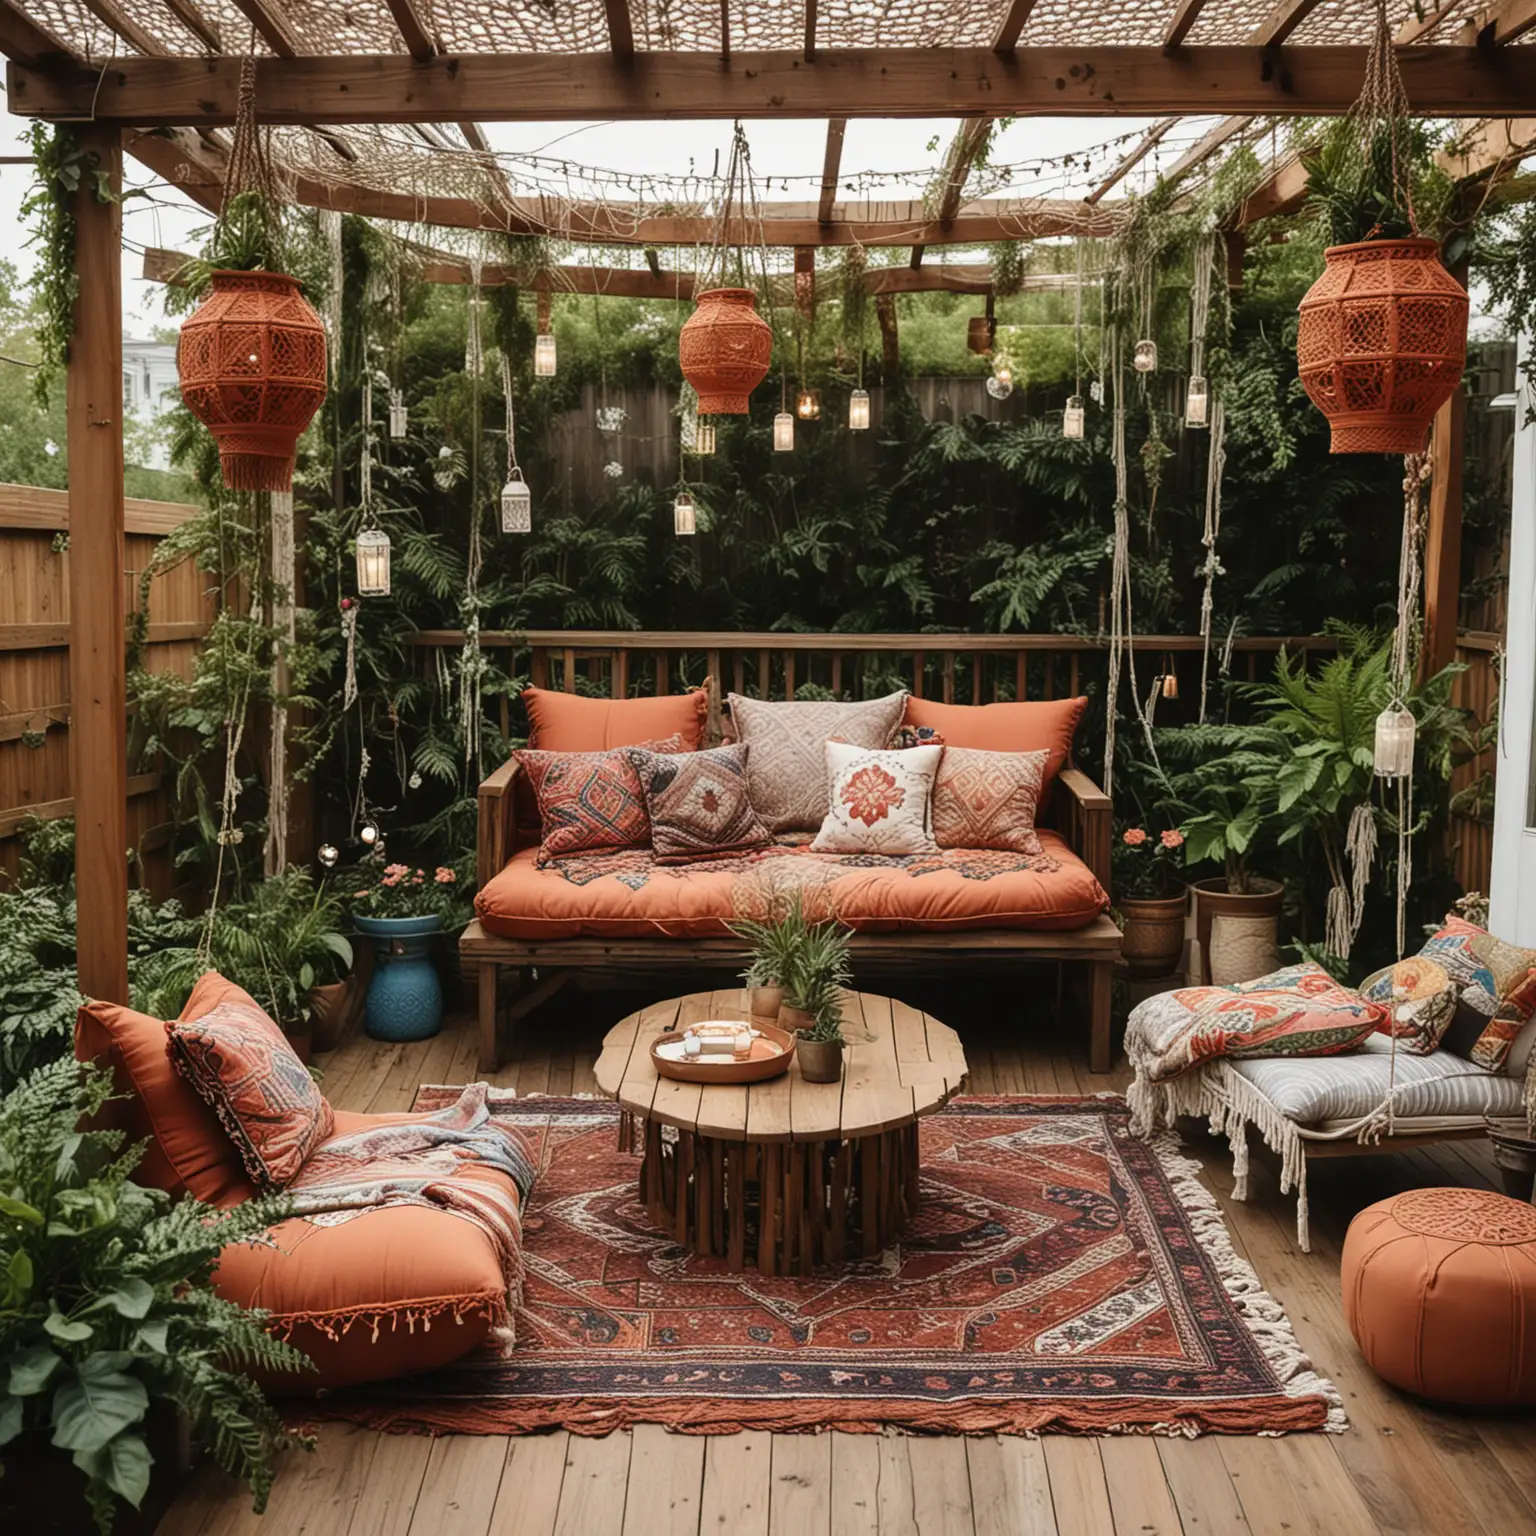 design a very wide distant shot of an outdoor lounge with Layered outdoor rugs on a hardwood deck, eclectic mix of cushions and poufs in vibrant patterns. Macramé plant hangers with trailing ivy and ferns hang from the pergola draped with fairy lights. Low wooden tables hold lanterns and candles, creating a relaxed, bohemian vibe. Incorporate hanging dreamcatchers and wind chimes for added whimsy.